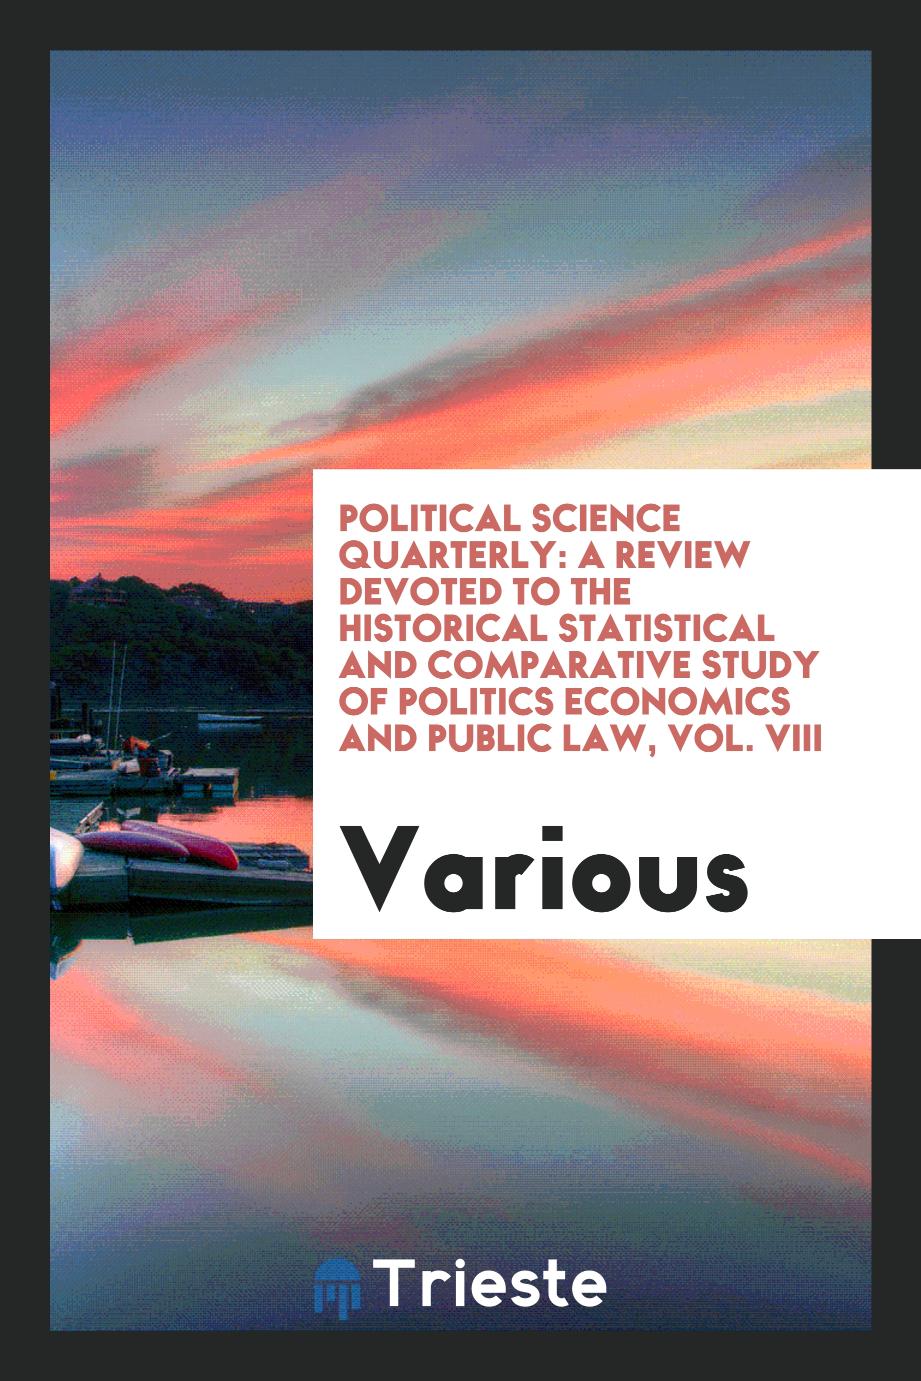 Political Science Quarterly: A Review Devoted to the Historical Statistical and Comparative Study of Politics Economics and Public Law, Vol. VIII